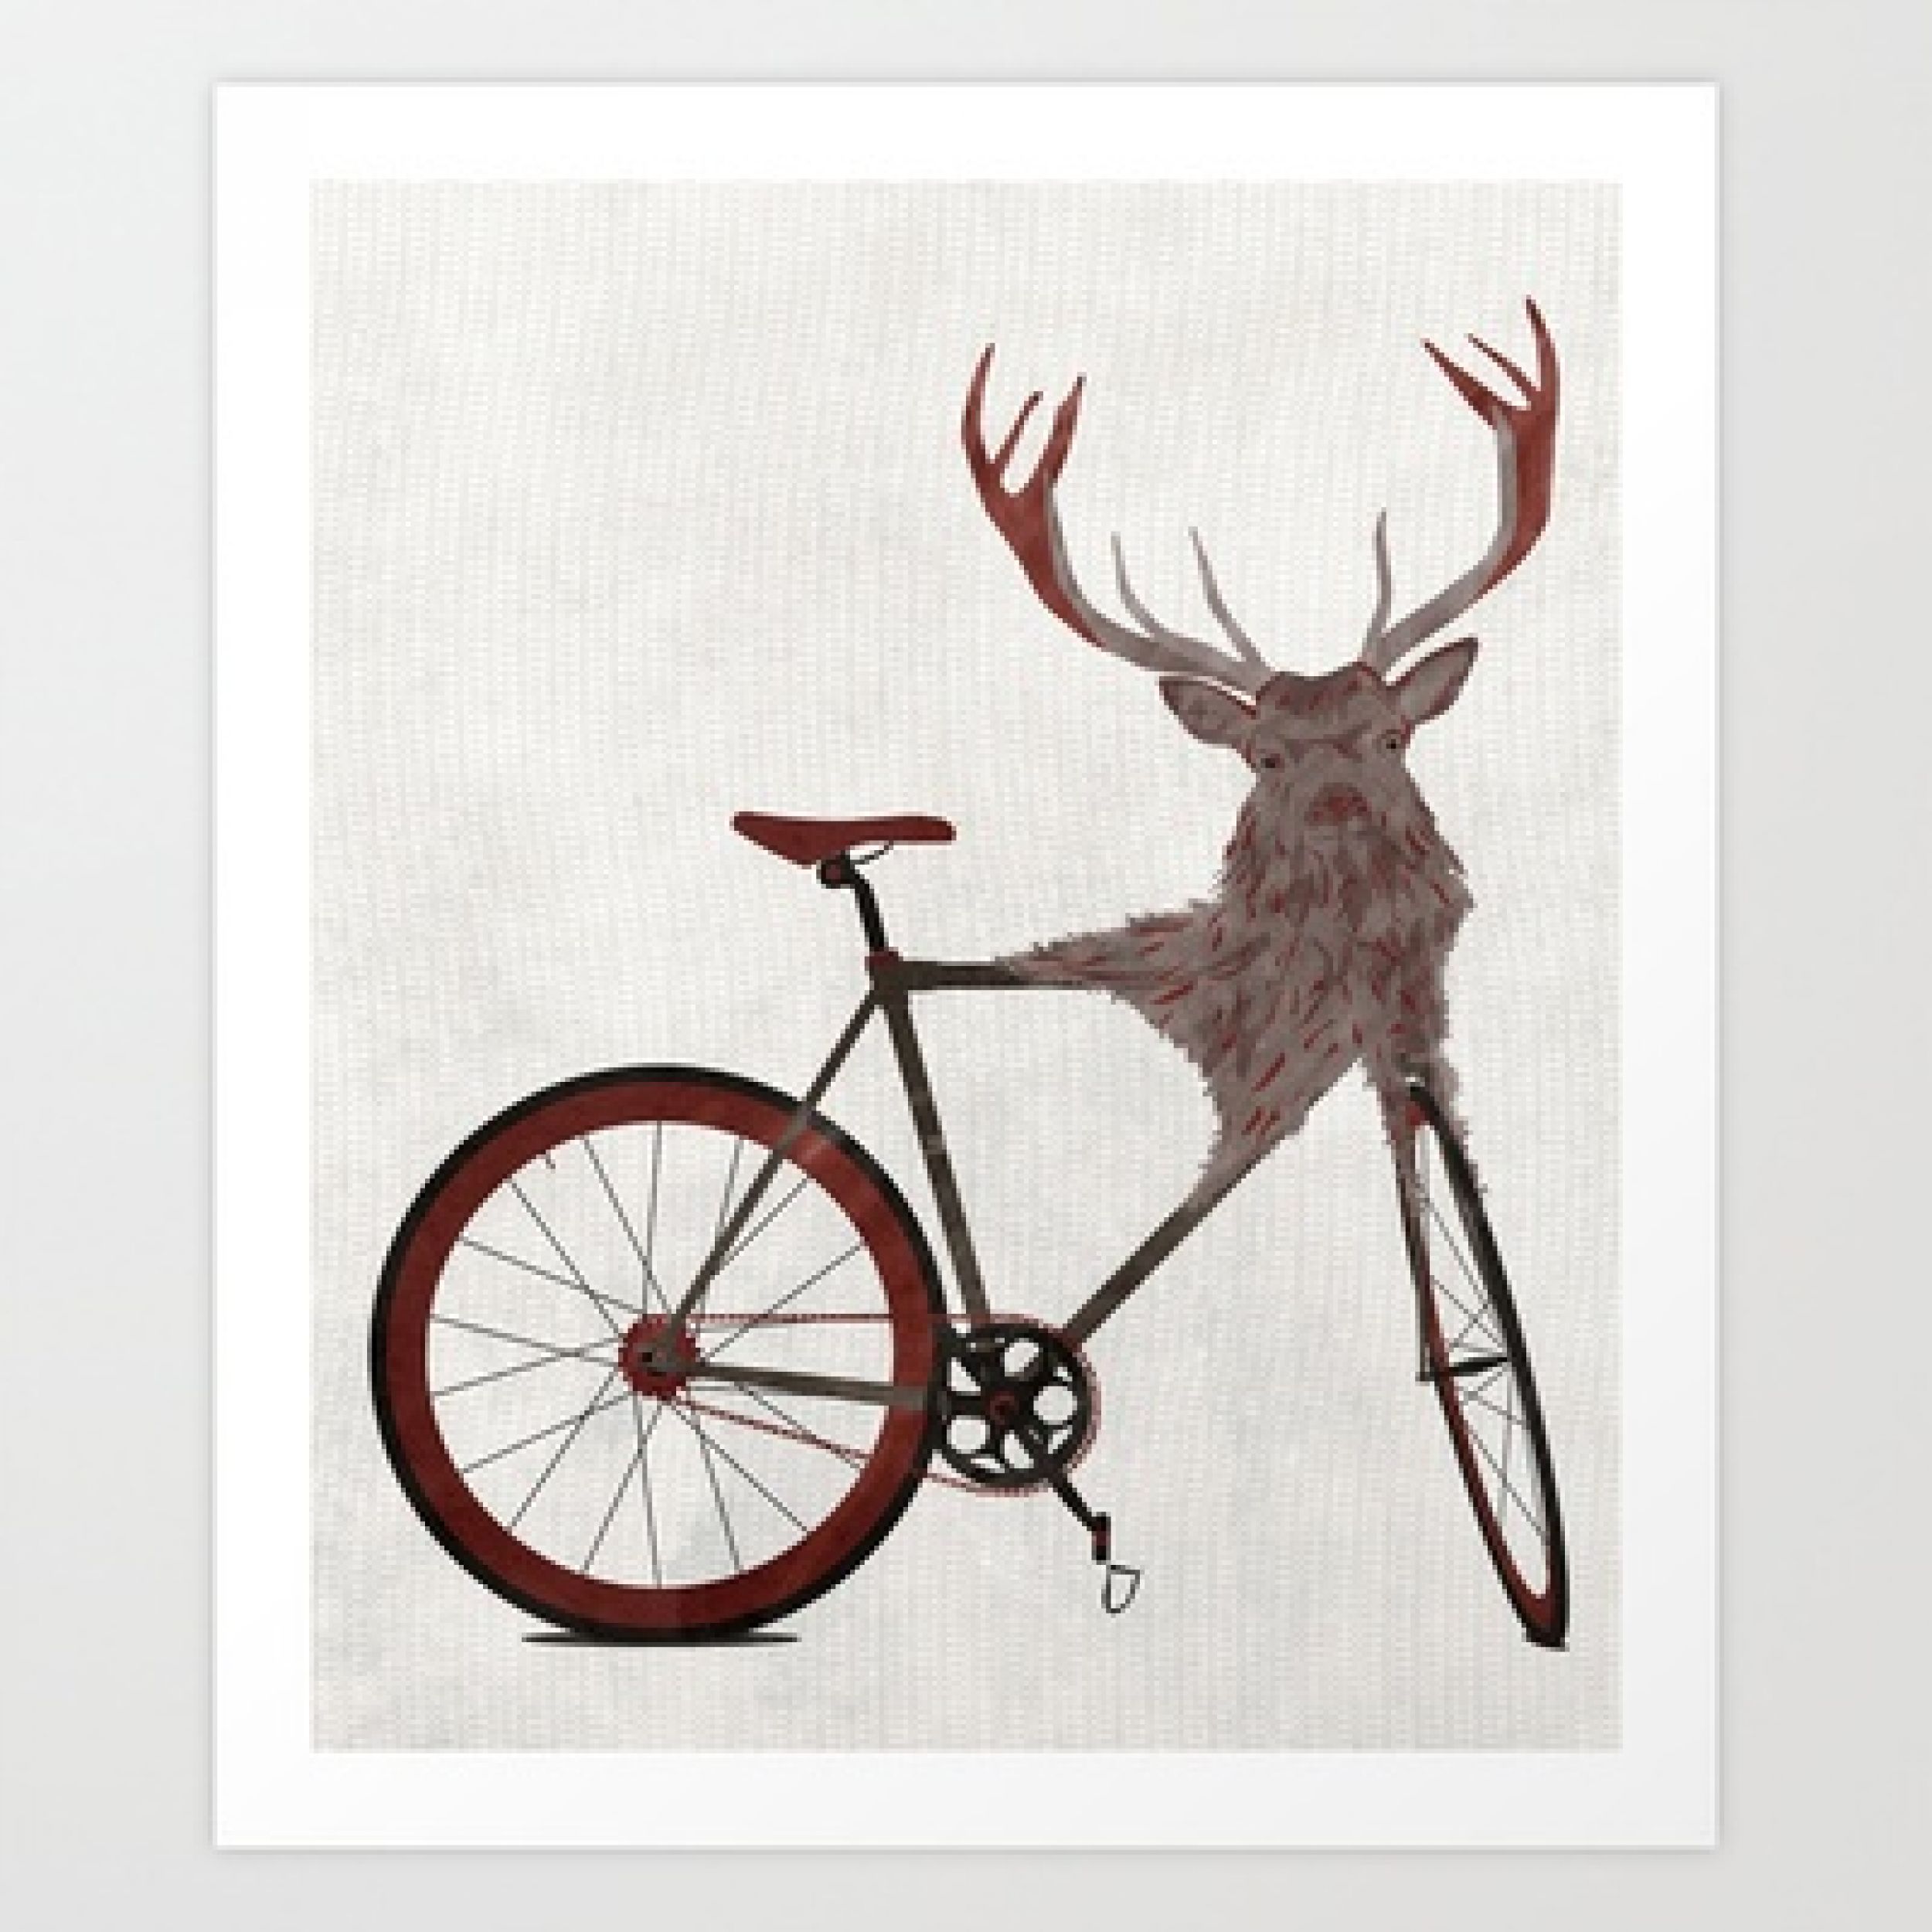 Stag_Bike_by_Andy_Scullion.jpg